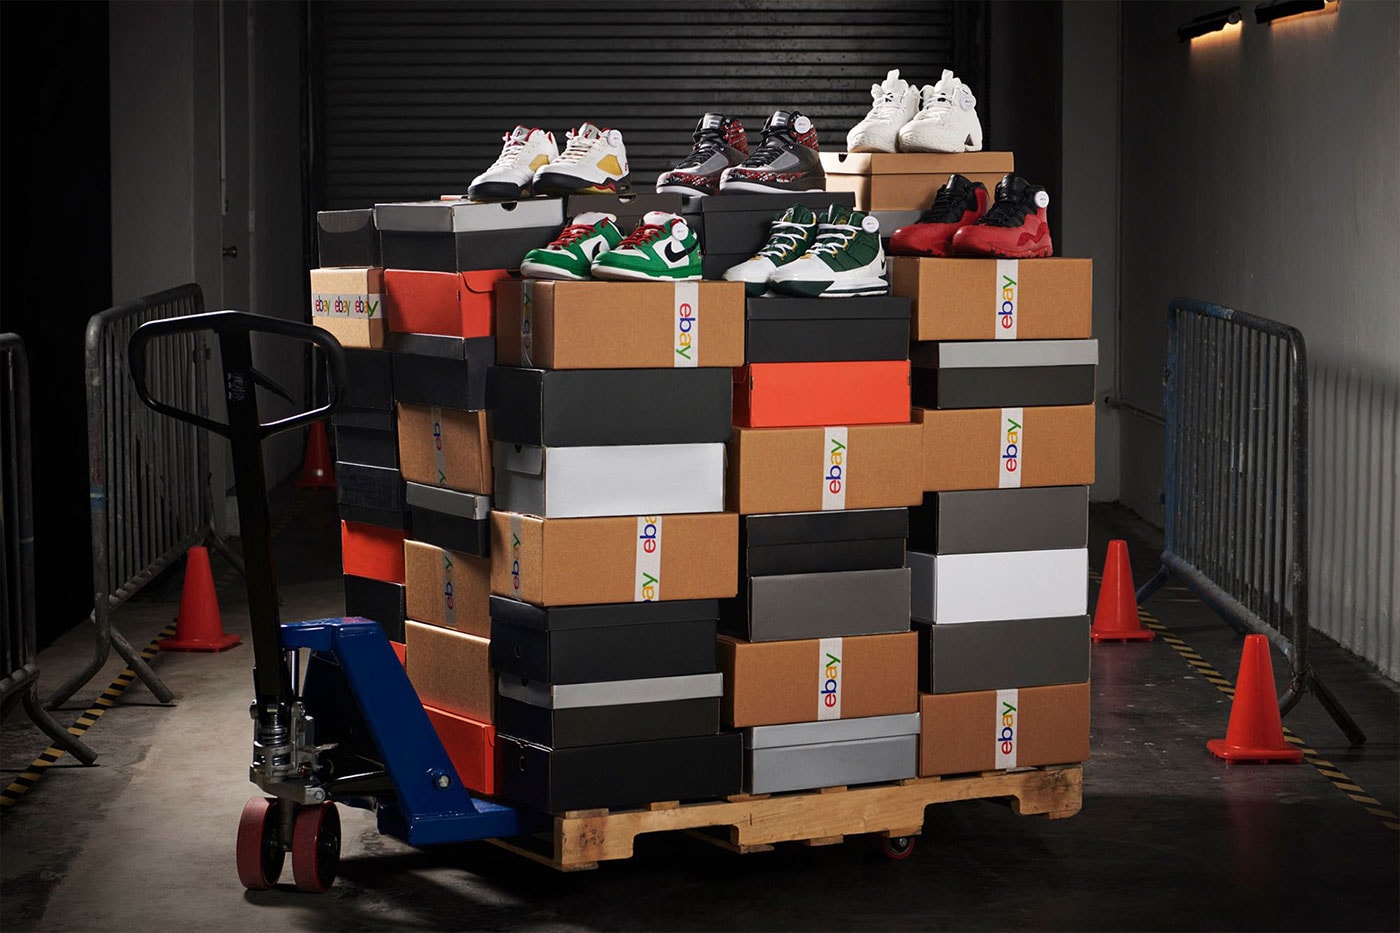 P.J. Tucker is Selling 100 Sneakers from His Personal Archive on